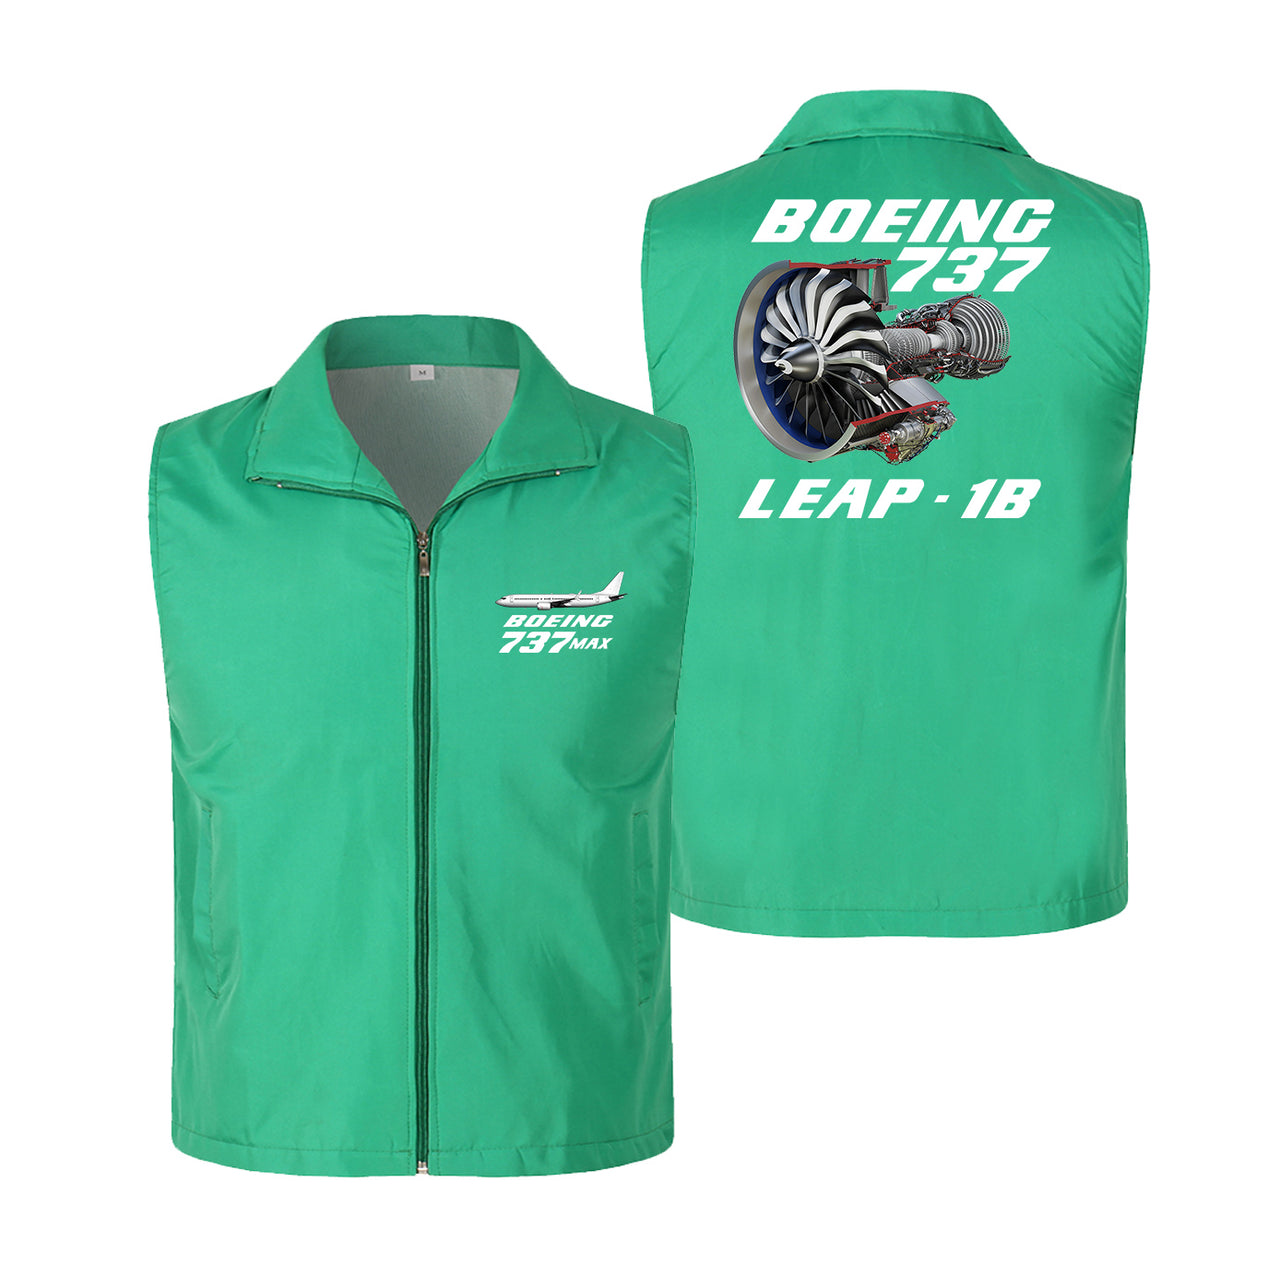 Boeing 737 & Leap 1B Designed Thin Style Vests